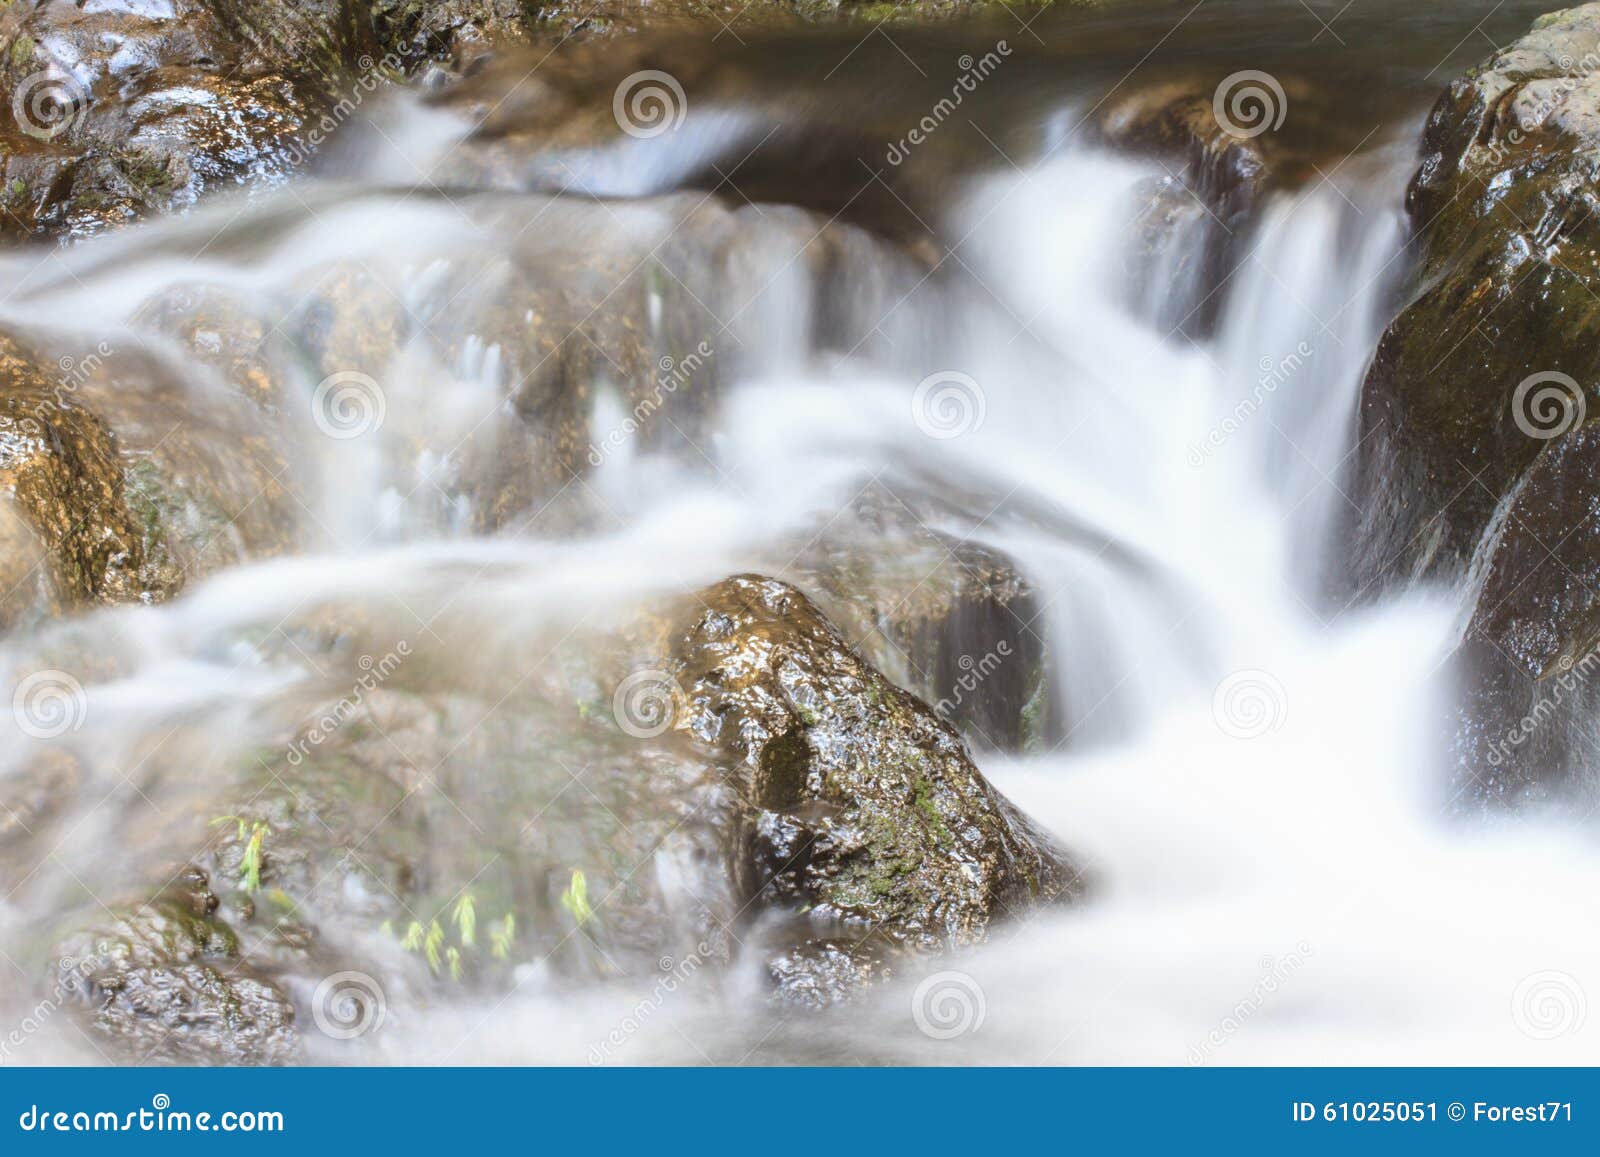 Waterfall And Rocks Covered With Moss Stock Image Image Of Rock